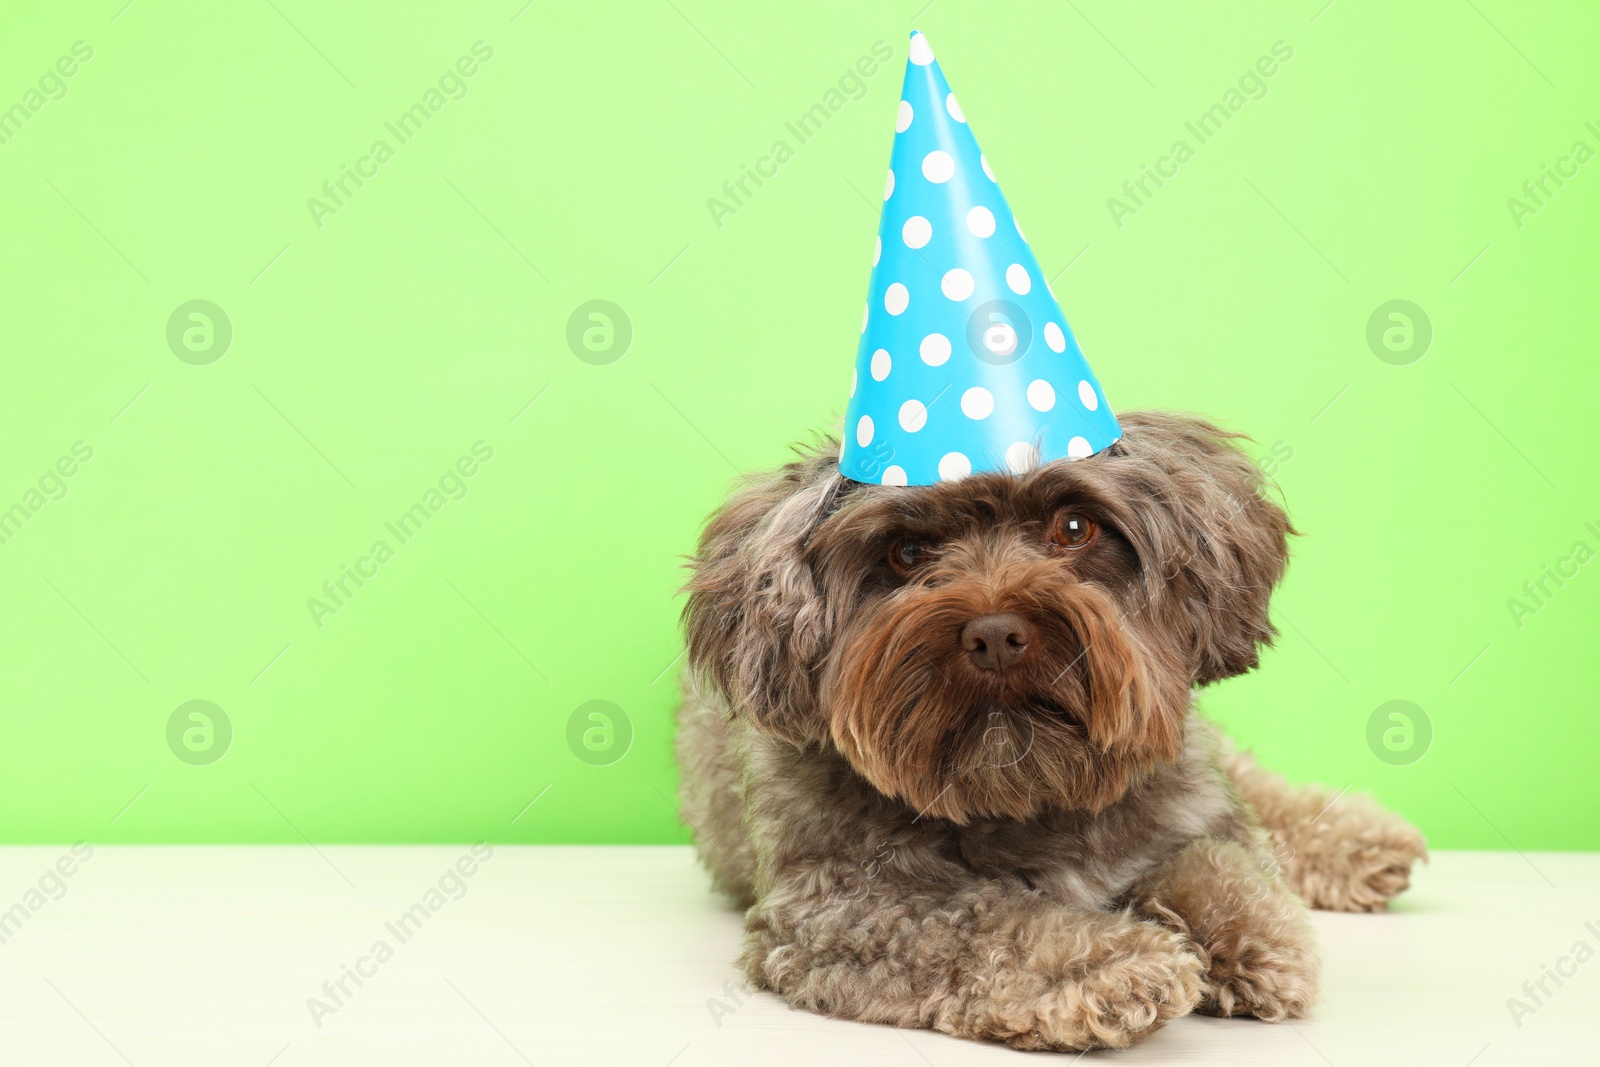 Photo of Cute Maltipoo dog wearing party hat on white table against green background, space for text. Lovely pet